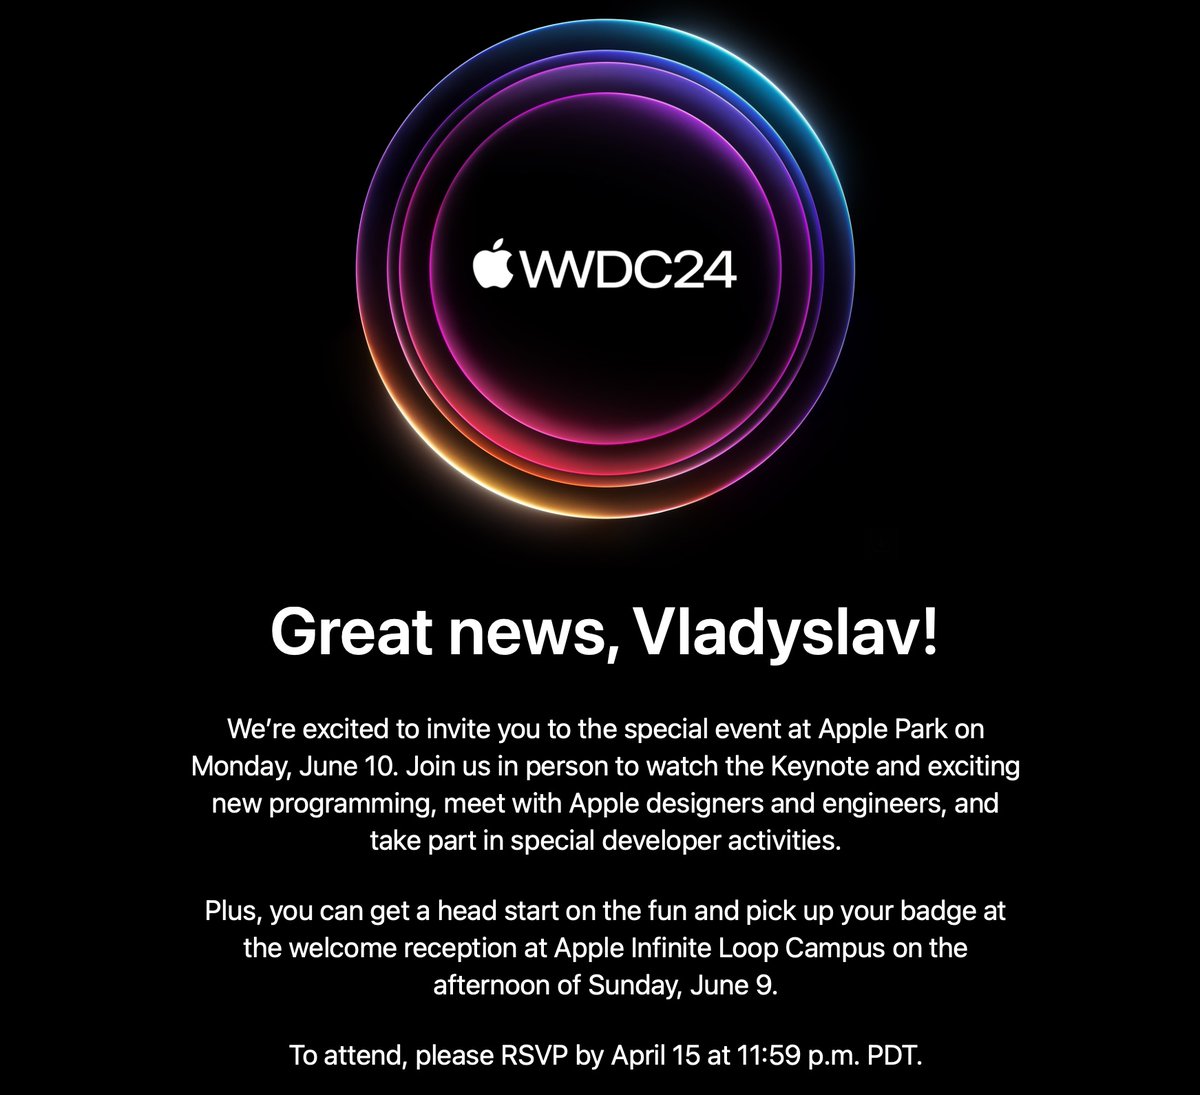 Looks like we’ll be at Apple Park for #WWDC24 🛸 Who else? Let's connect!